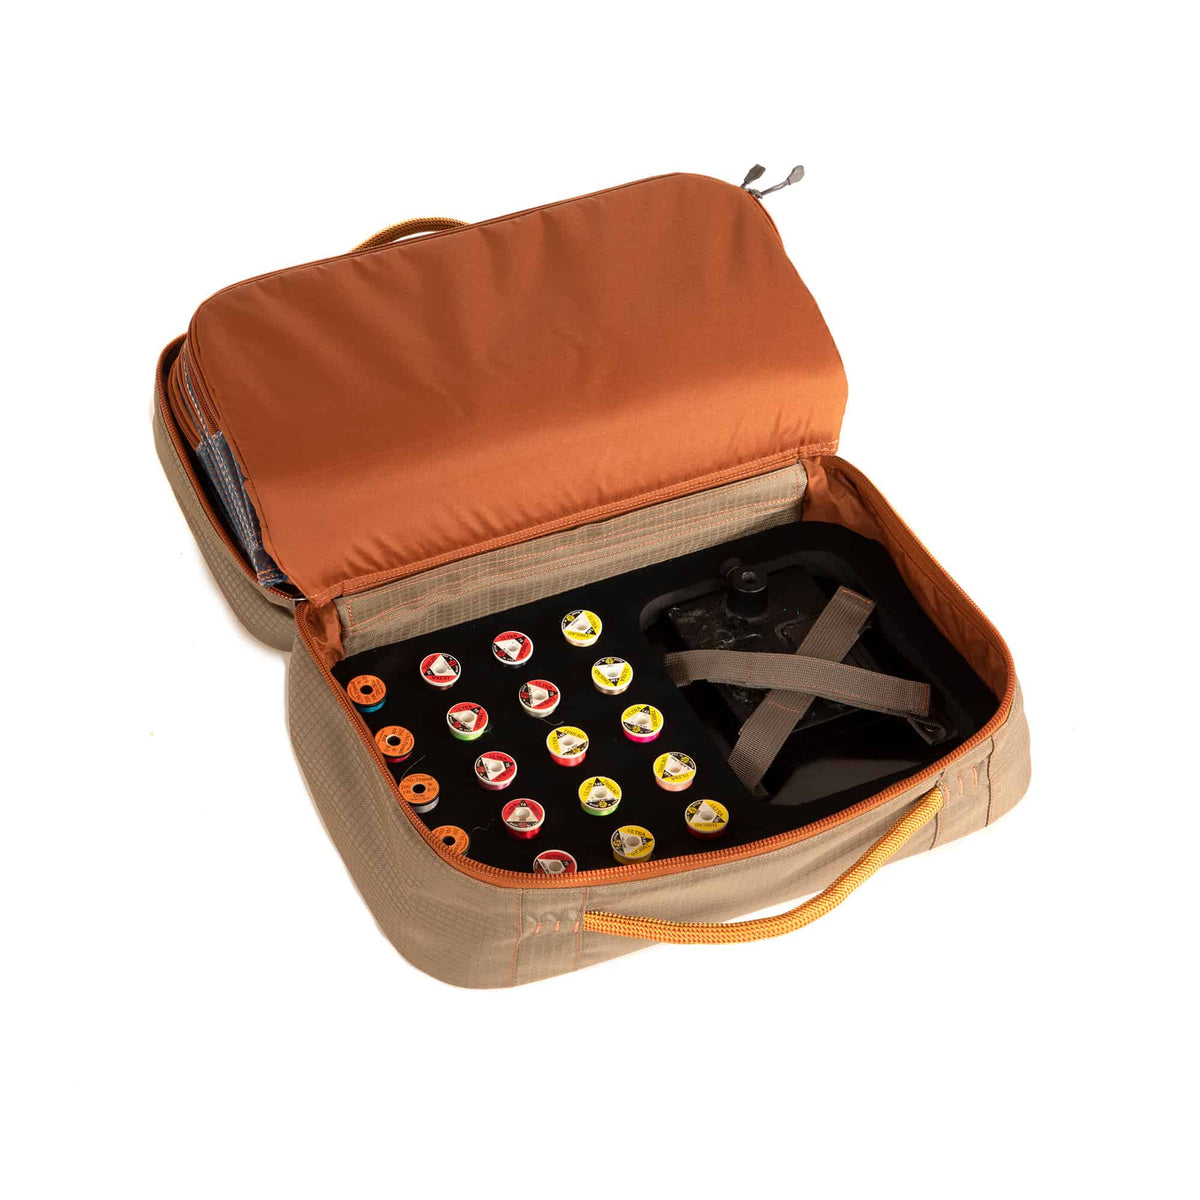 Fishpond Tailwater Fly Tying Storage and Travel Kit Thread Page